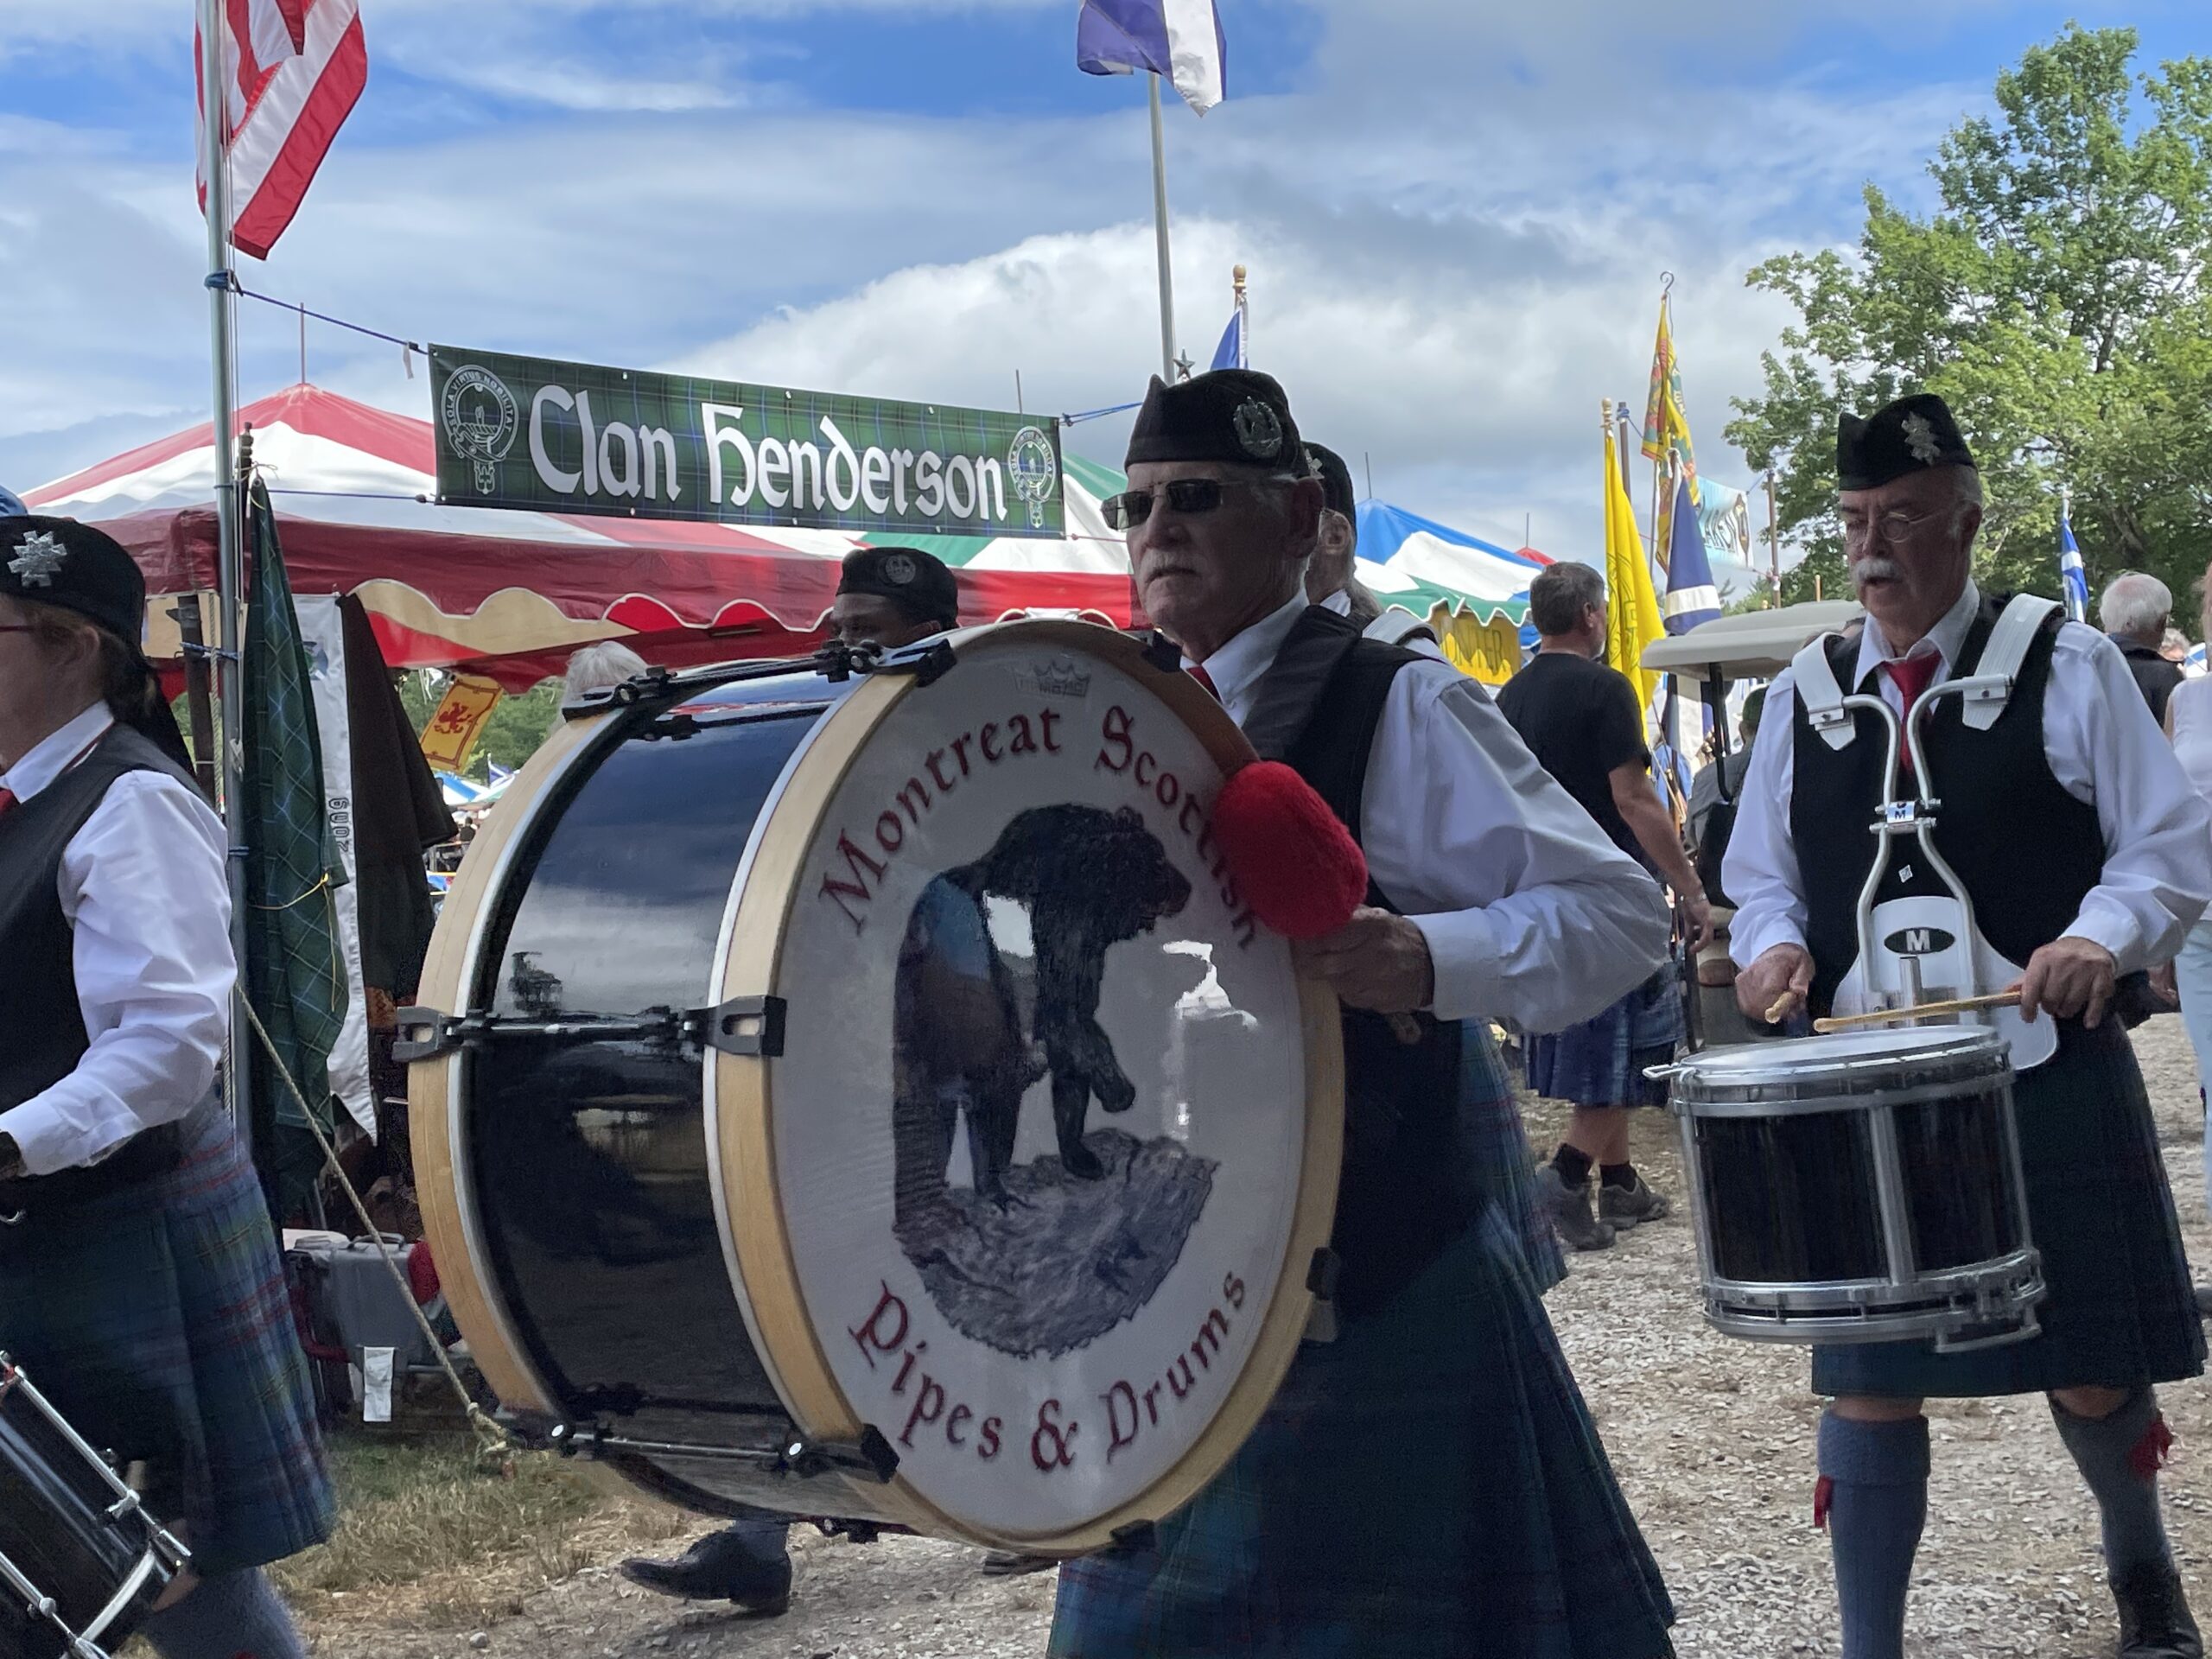 Drummer performing in pipes and drums parade